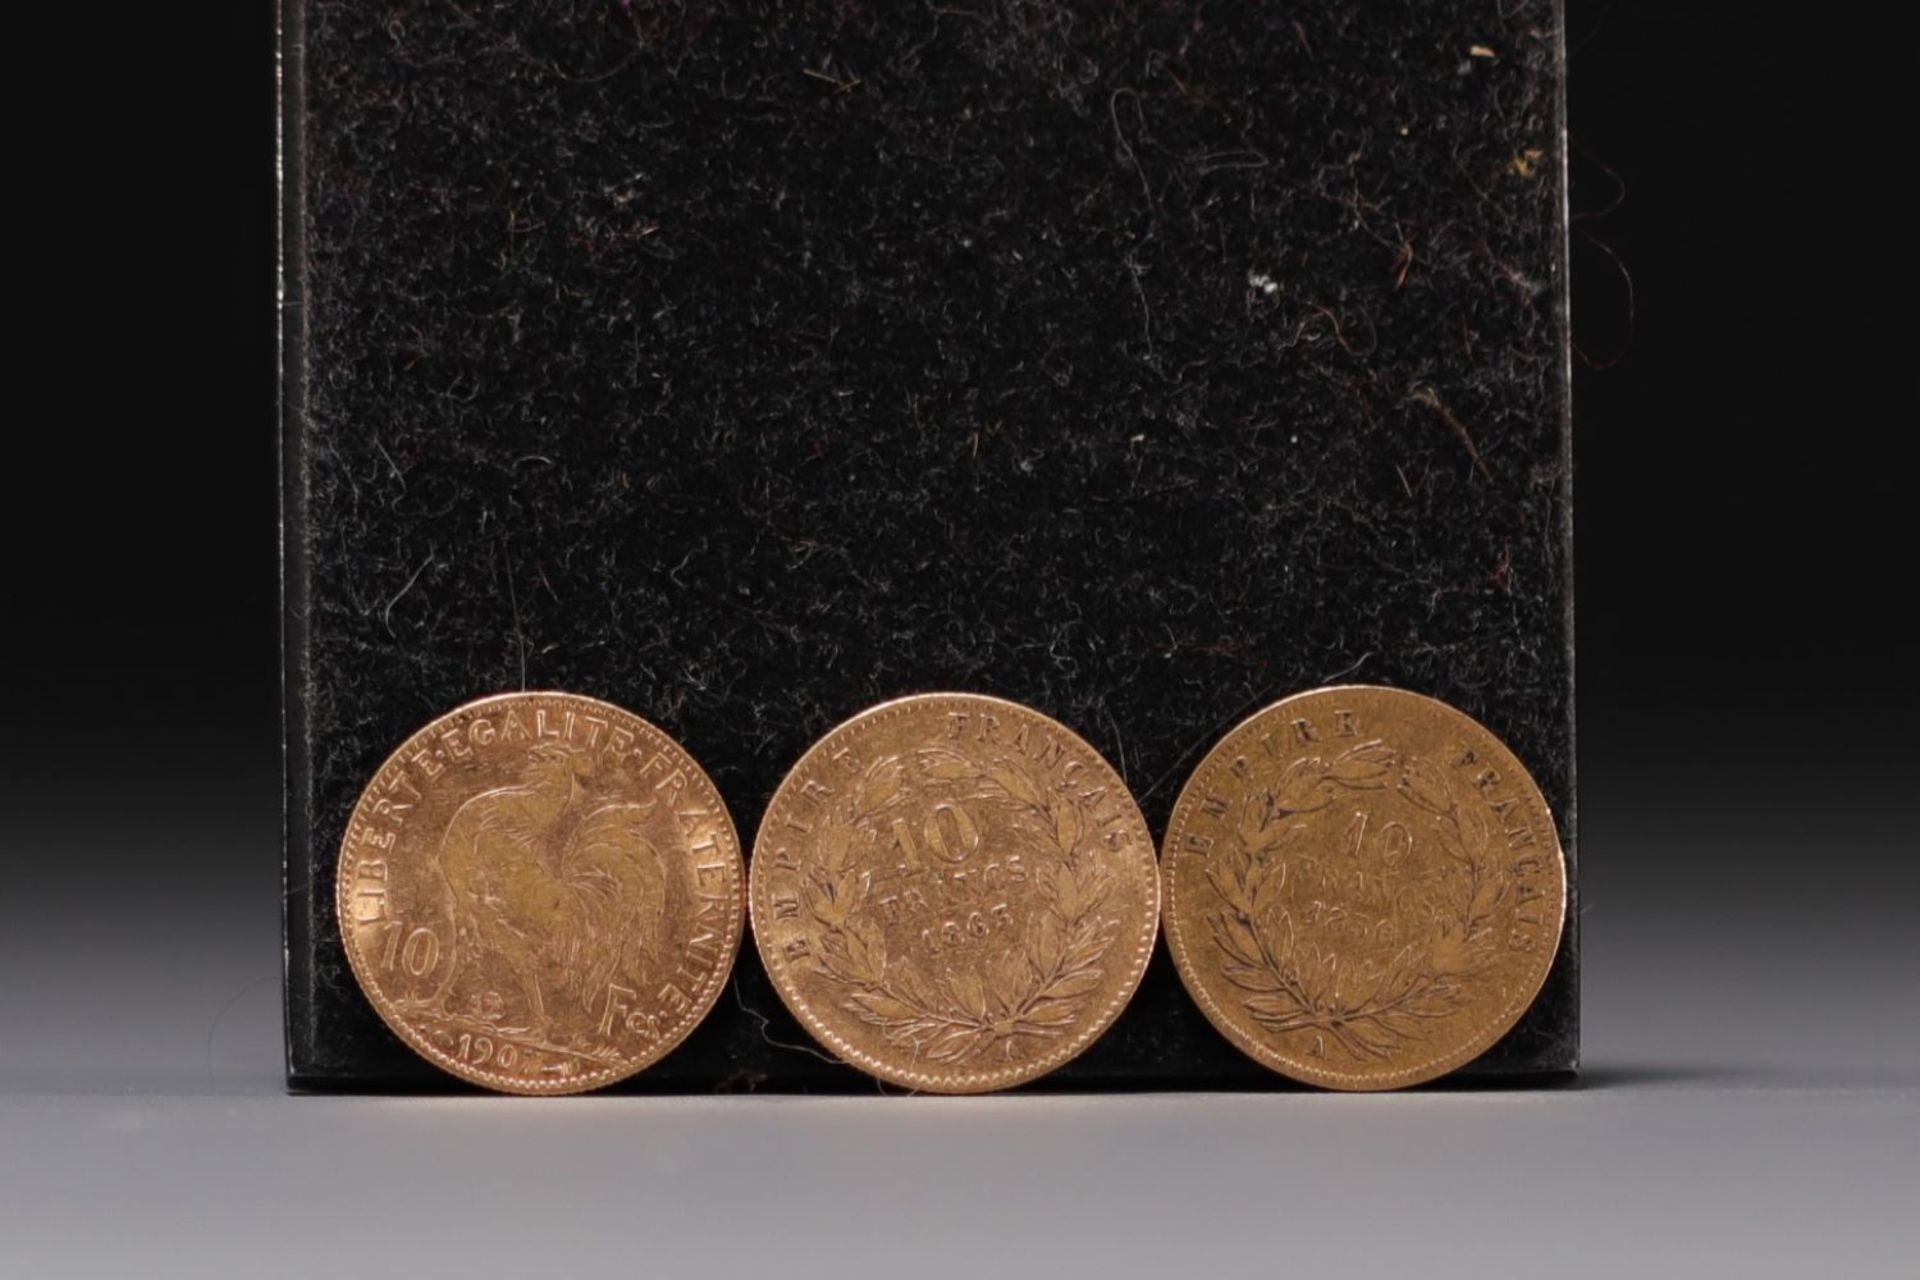 Set of three 10 Frs Gold coins, a Marianne from 1907 and two 10 Frs Napoleon III from 1826 and 1863. - Bild 2 aus 2